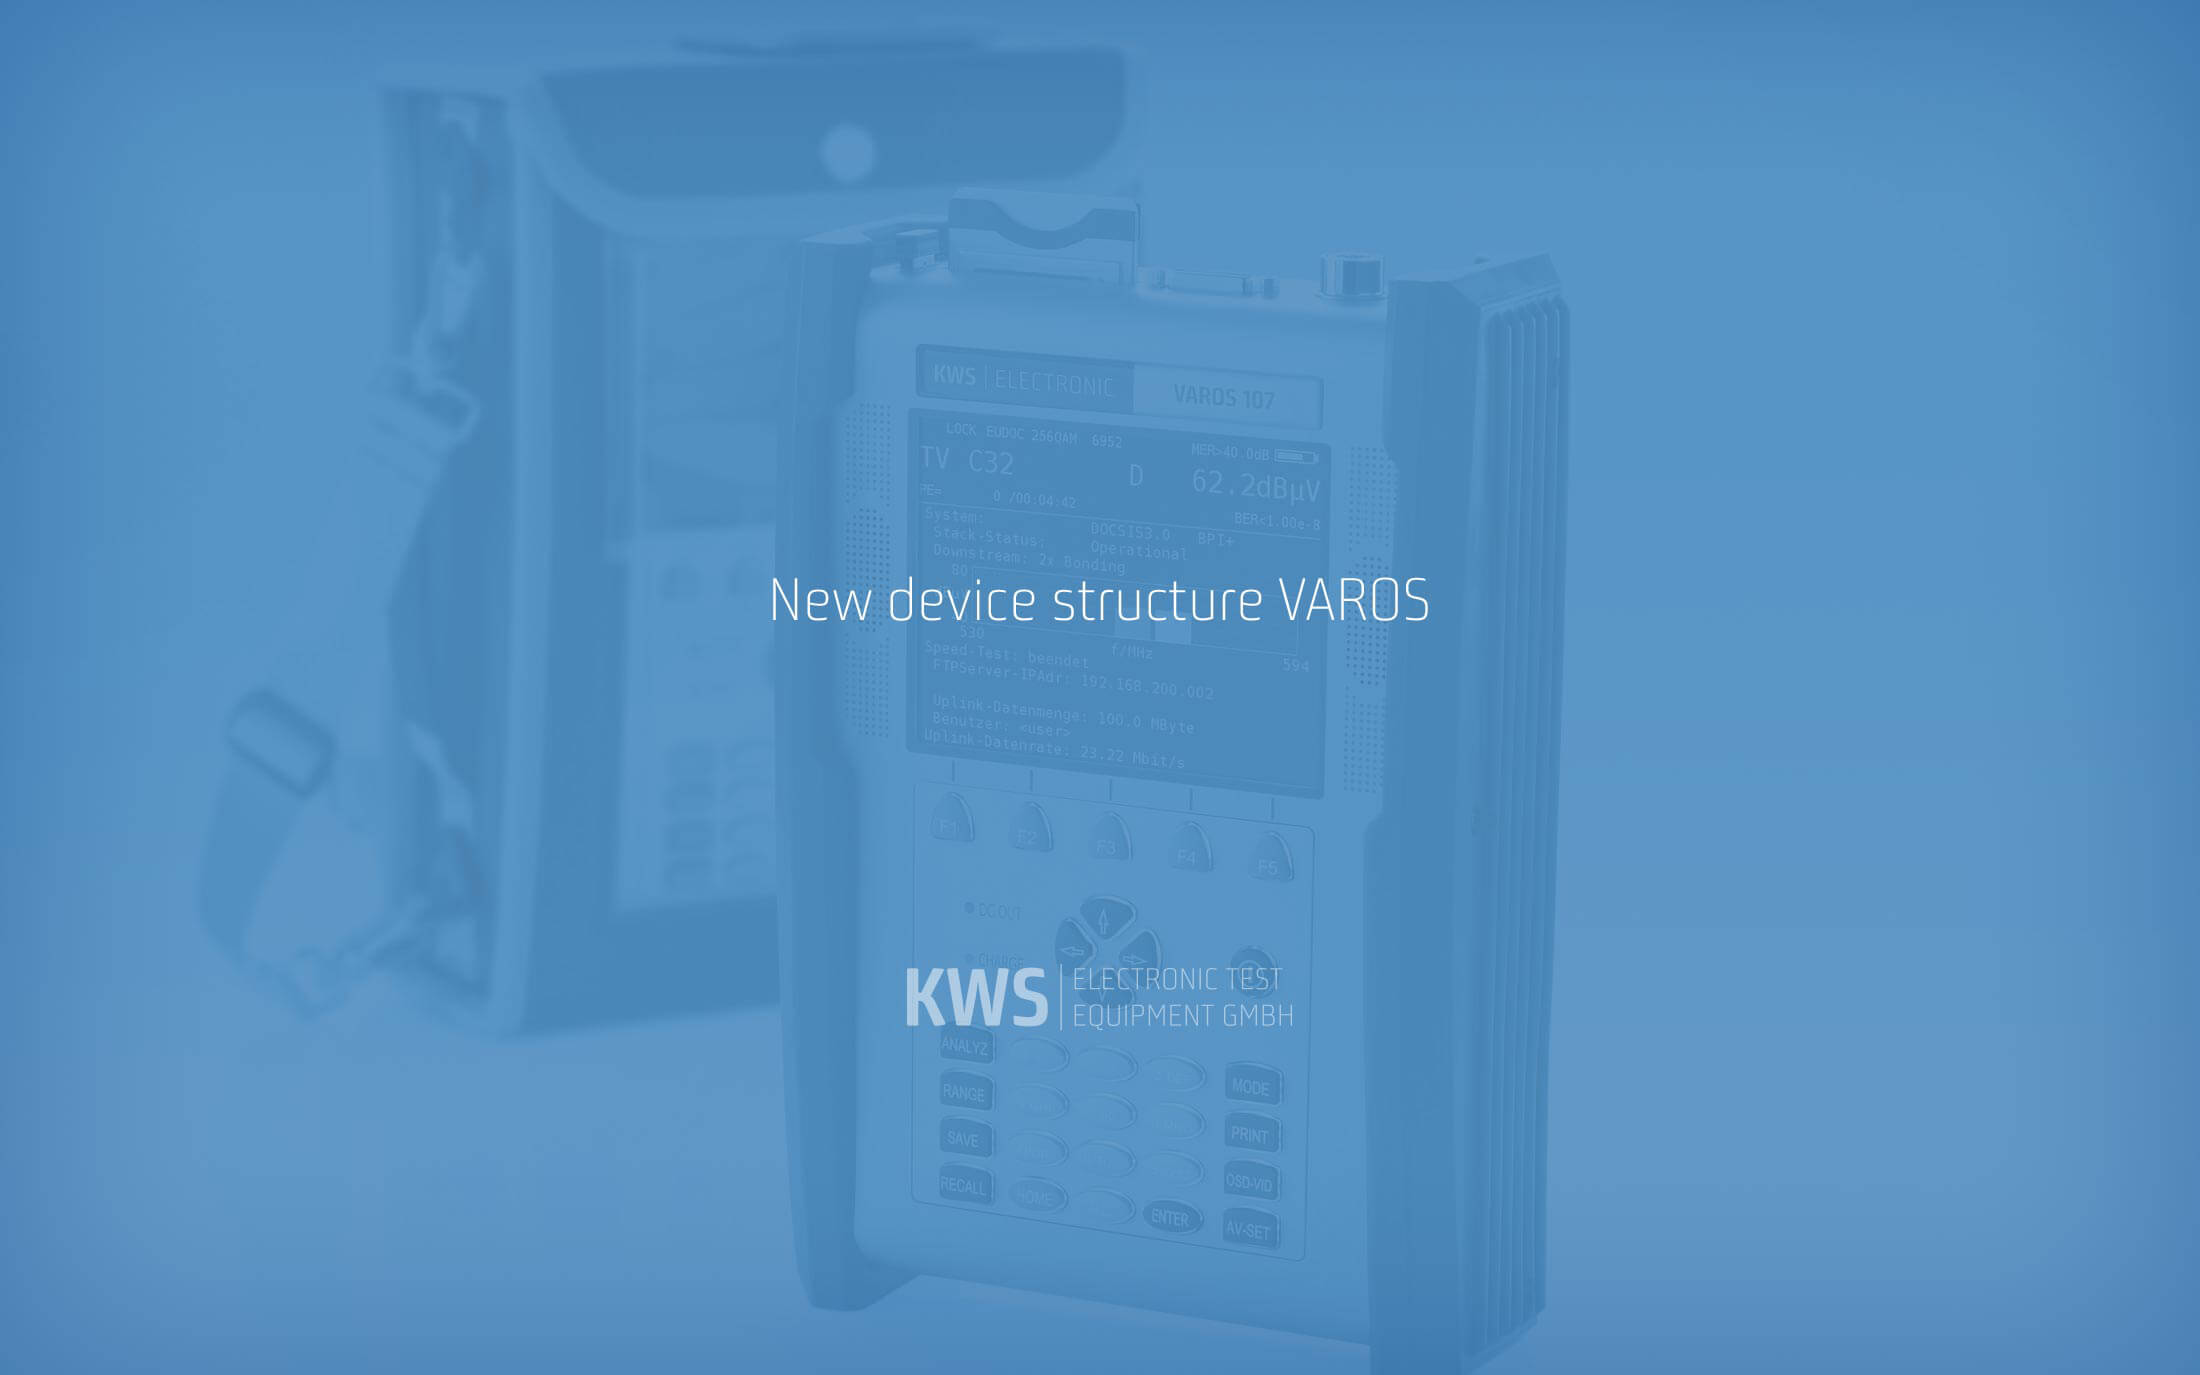 KWS-Electronic News 2019: New device structure VAROS